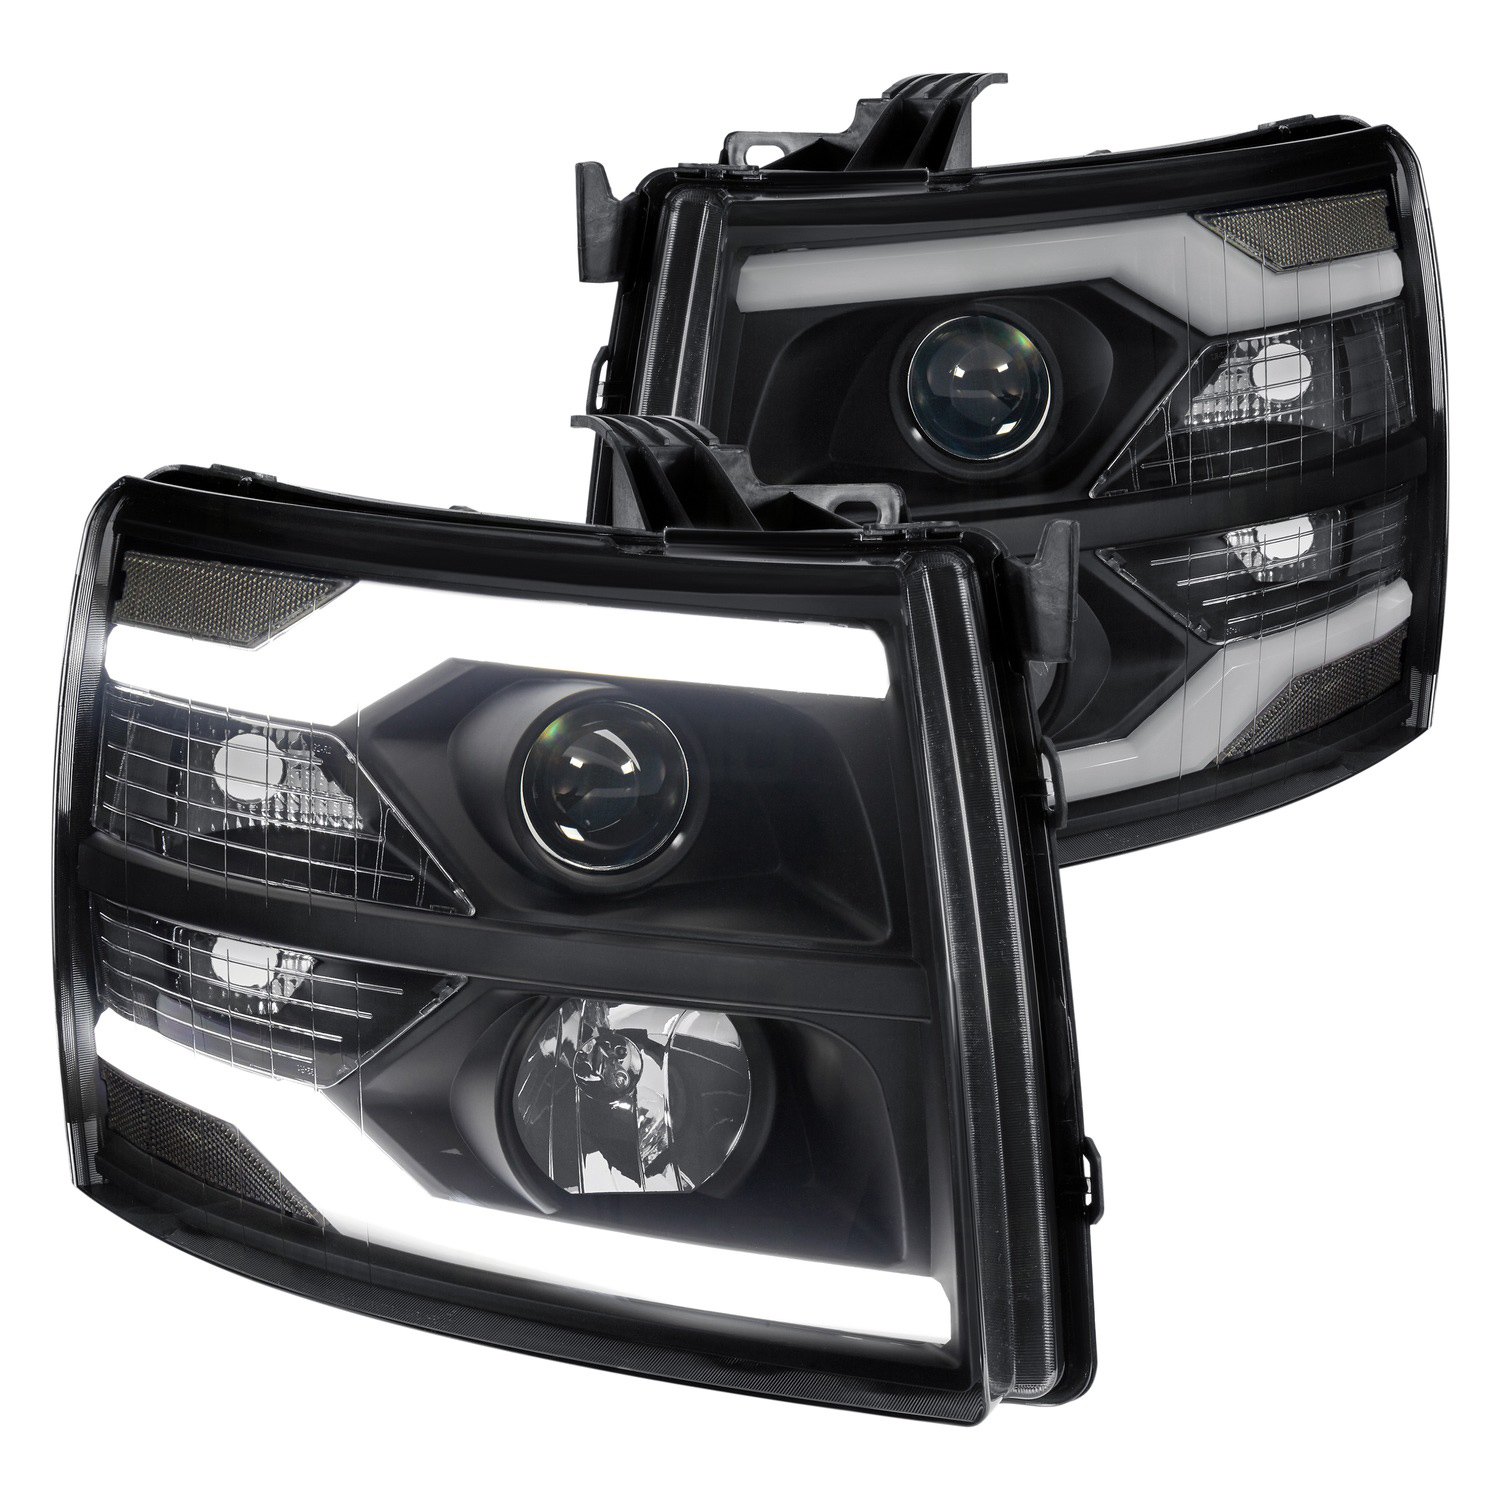 Fits 2007-2013 Chevy Silverado Dual DRL LED Tube Smoked Projector Headlights